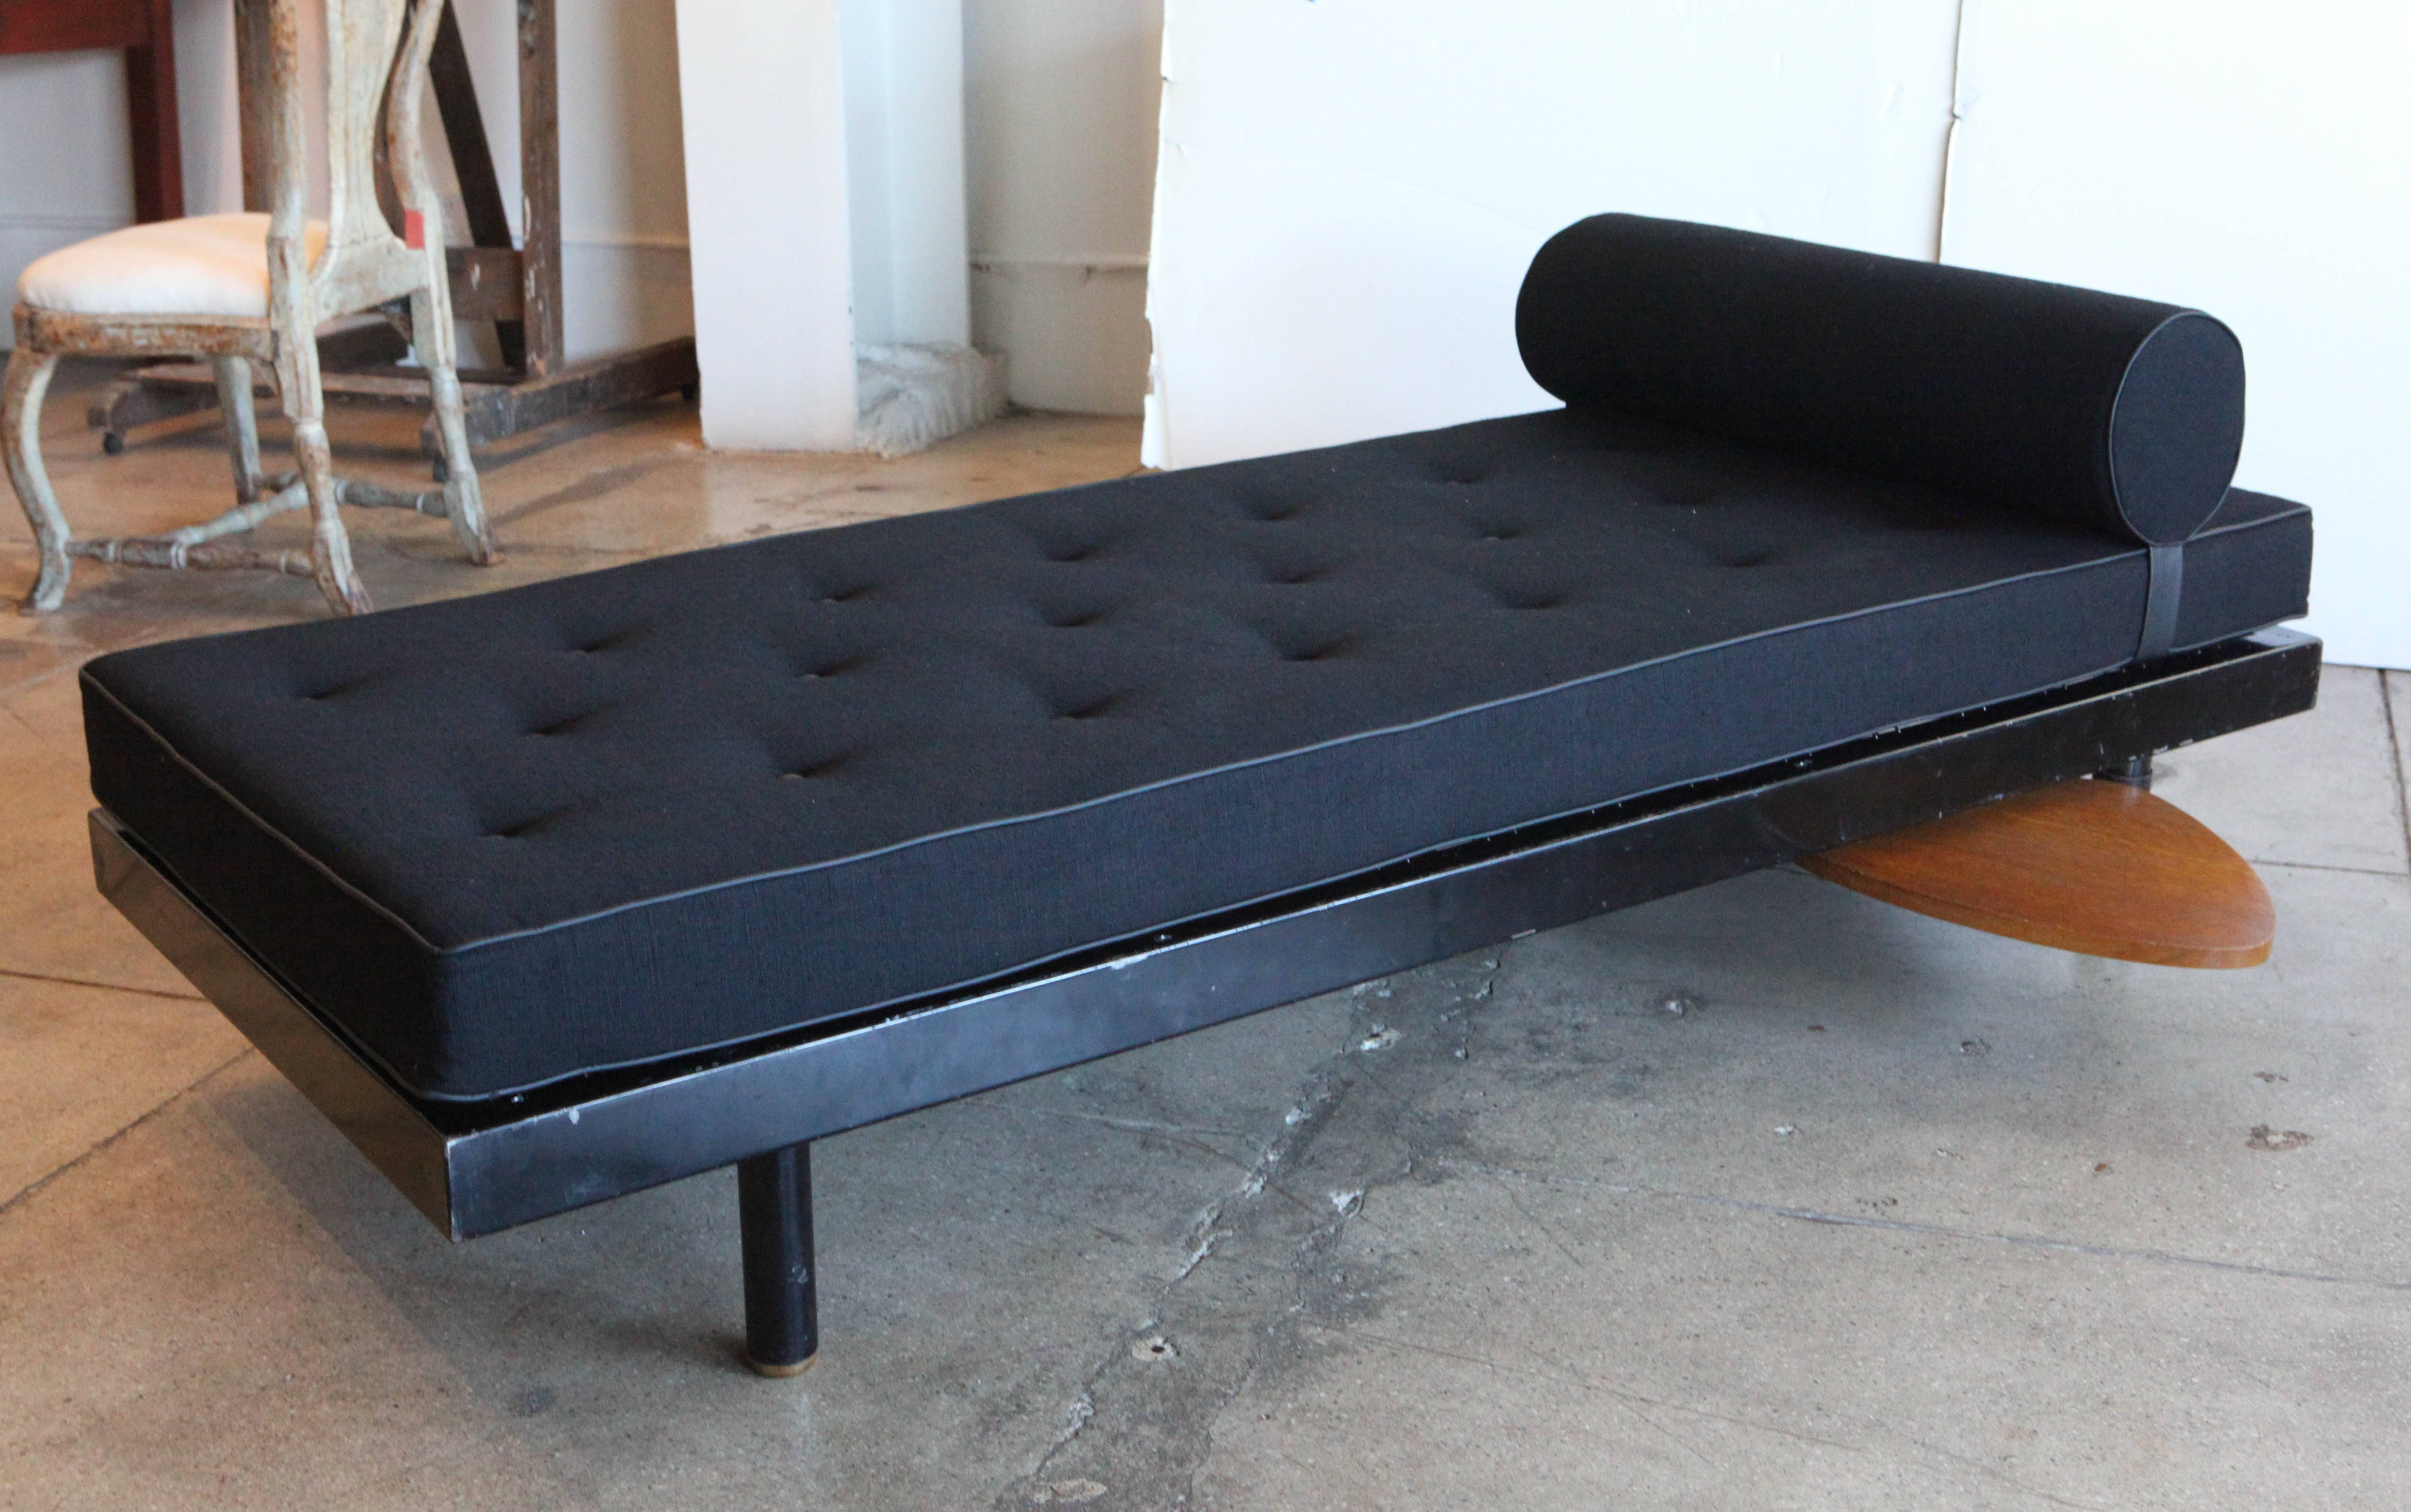 Charlotte Perriand & Jean Prouve 'Antony' Daybed by Les Ateliers, Jean Prouve